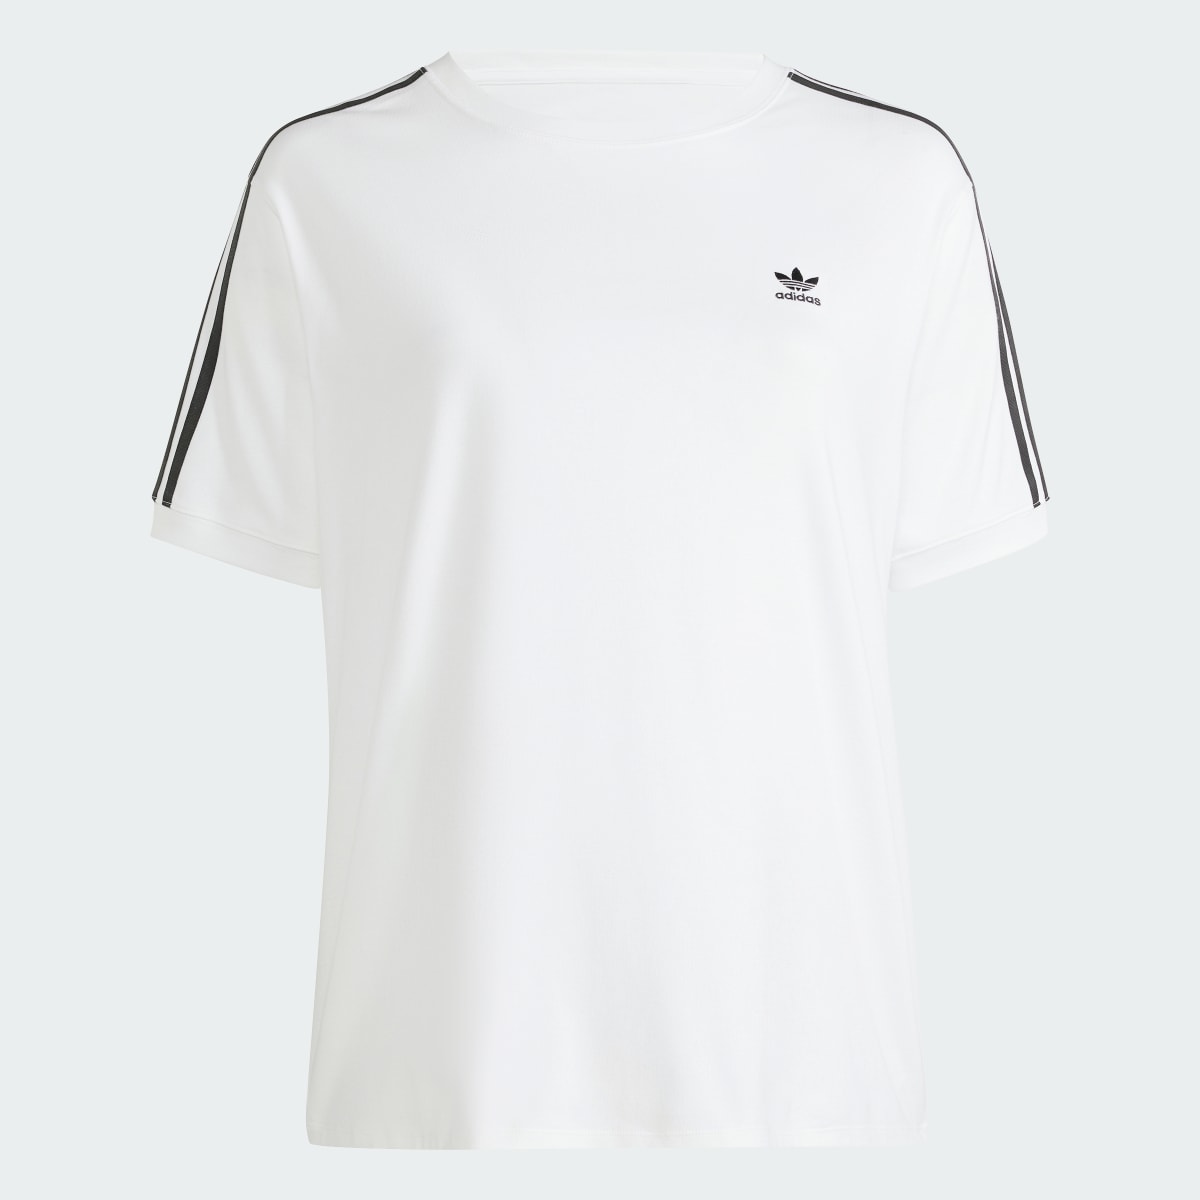 Adidas T-shirt 3-Stripes Baby (Grandes tailles). 5